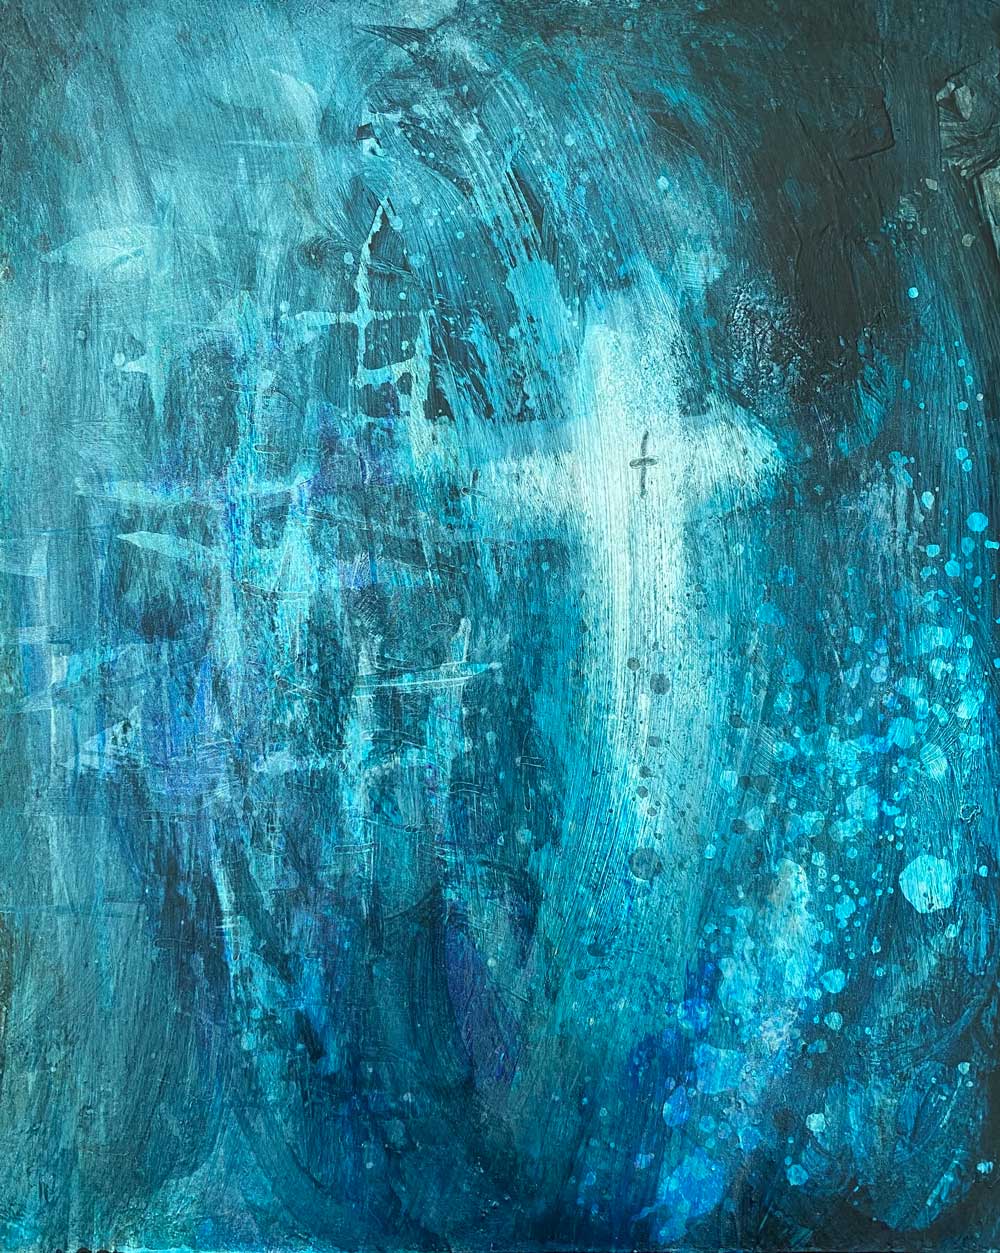 Abstract painting from the Fifth Sunday of Lent, 2020 by Michelle L Hofer